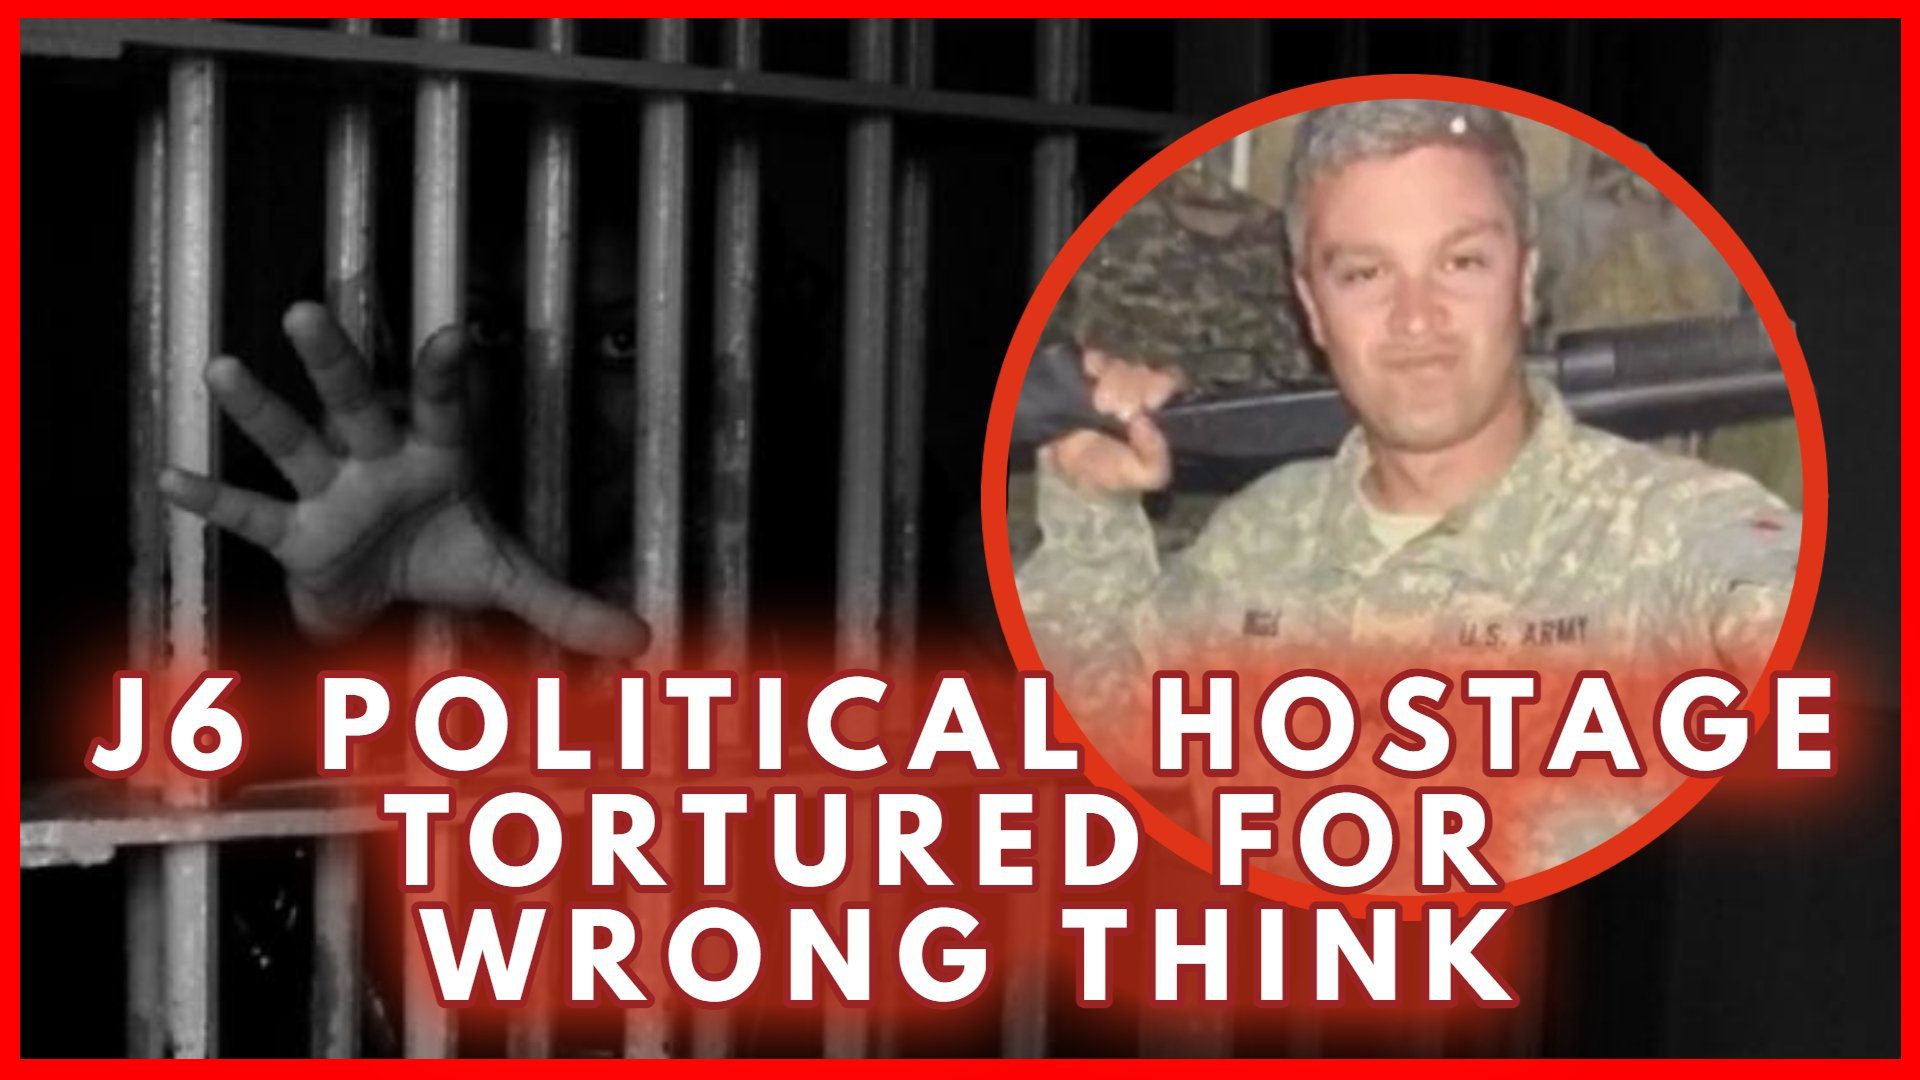 Unchecked Bureau of Prison Is TORTURING J6 ‘Terrorists’ And Illegally Barring Them From Speaking Out: ‘People Keep Committing Suicide Here’ – PLEASE SEND JOE BIGGS BOOKS AND LETTERS OF SUPPORT